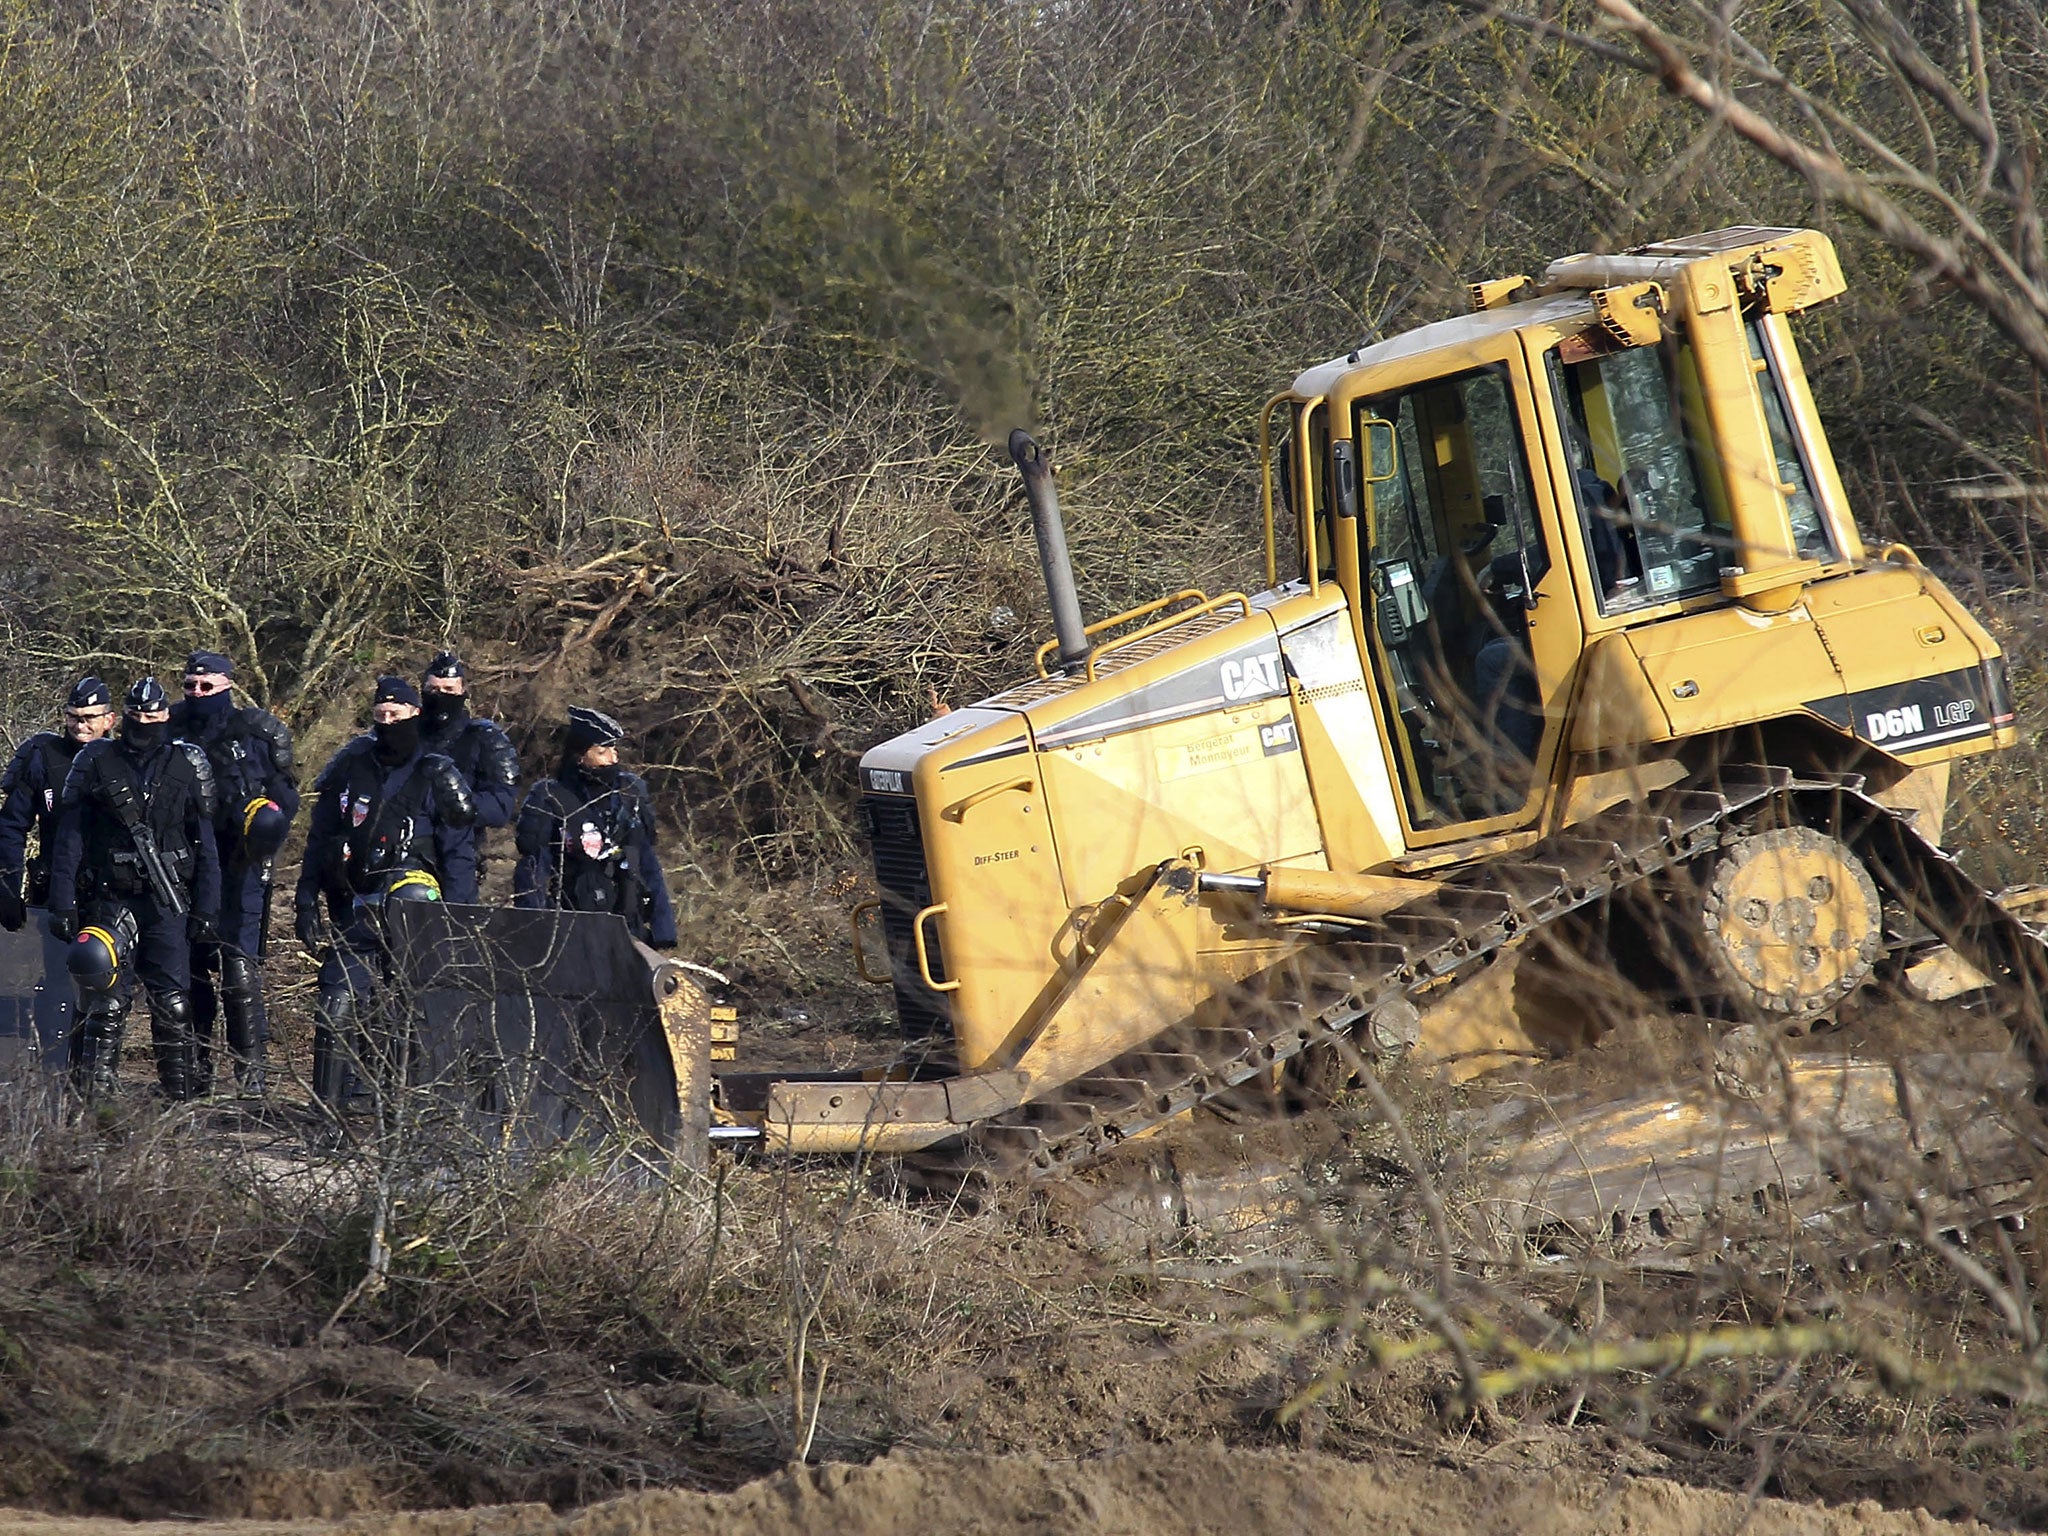 Police officers walk past a bulldozer in the Calais refugee camp, northern France Monday, Jan.18, 2016